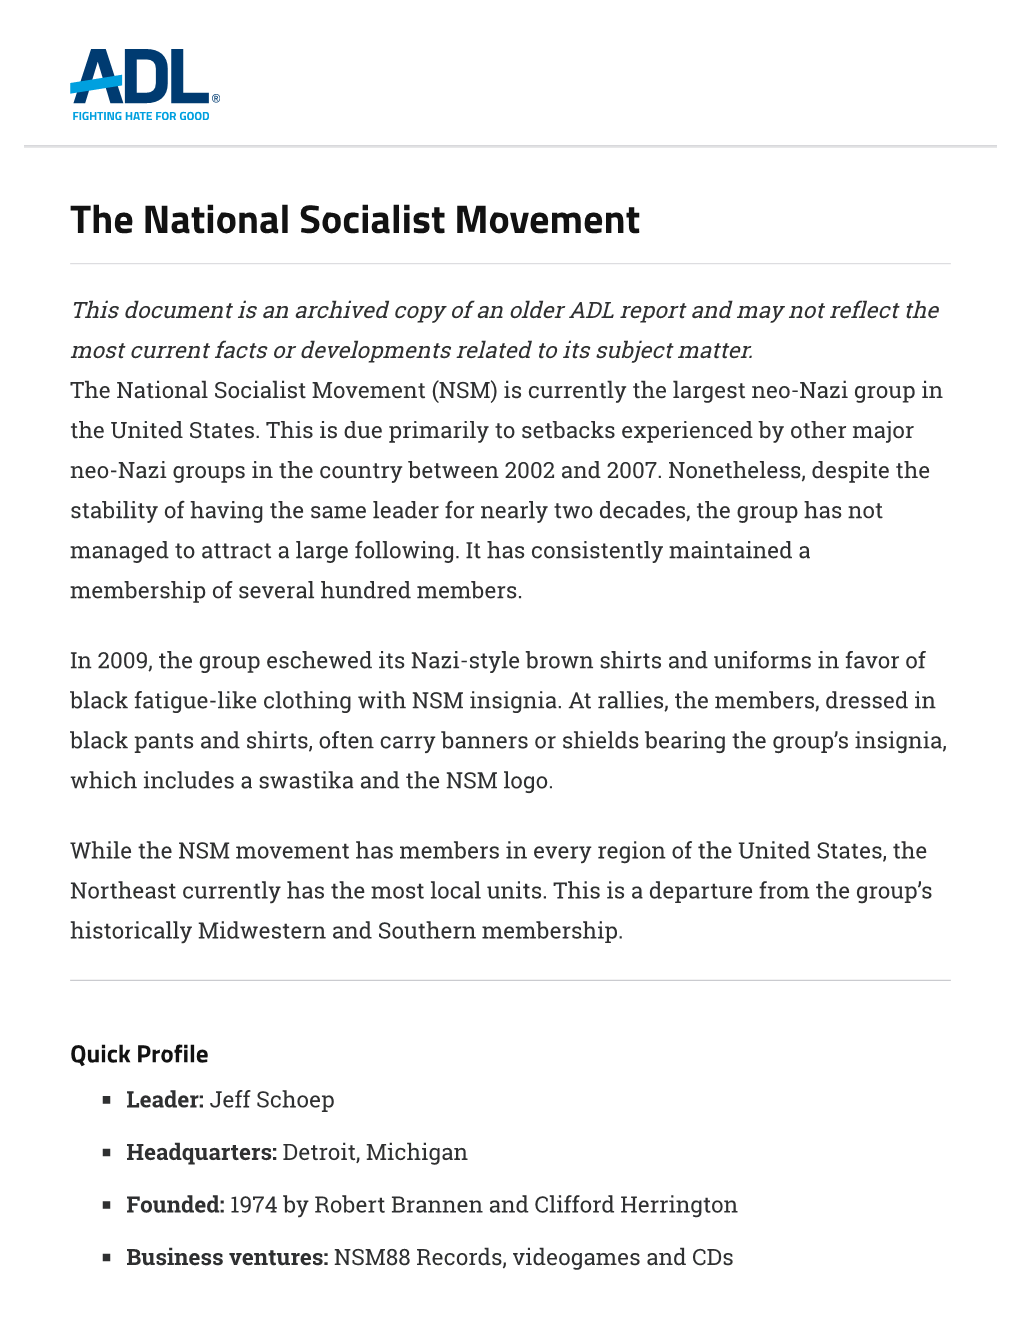 The National Socialist Movement